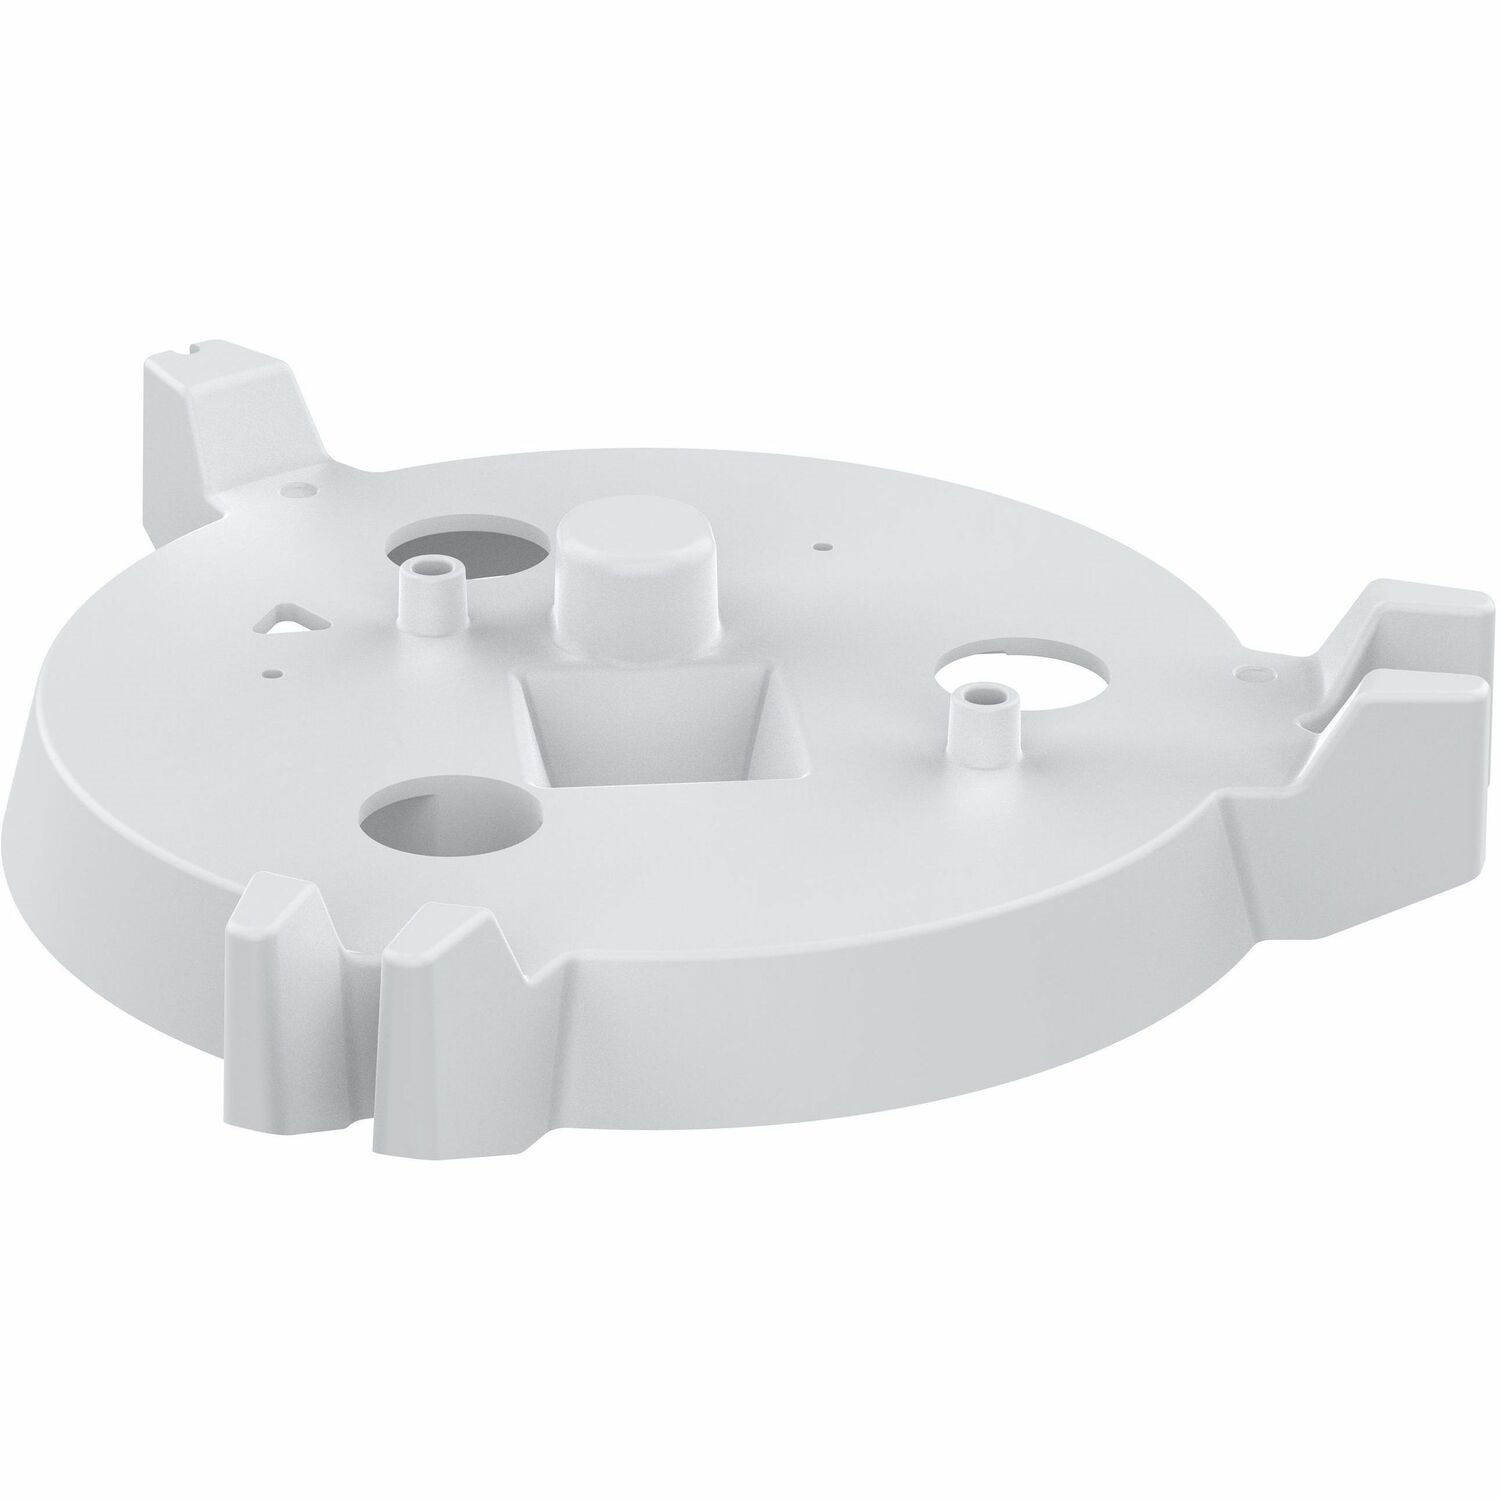 AXIS TP6902-E Mounting Bracket for Network Camera, PTZ Camera - White